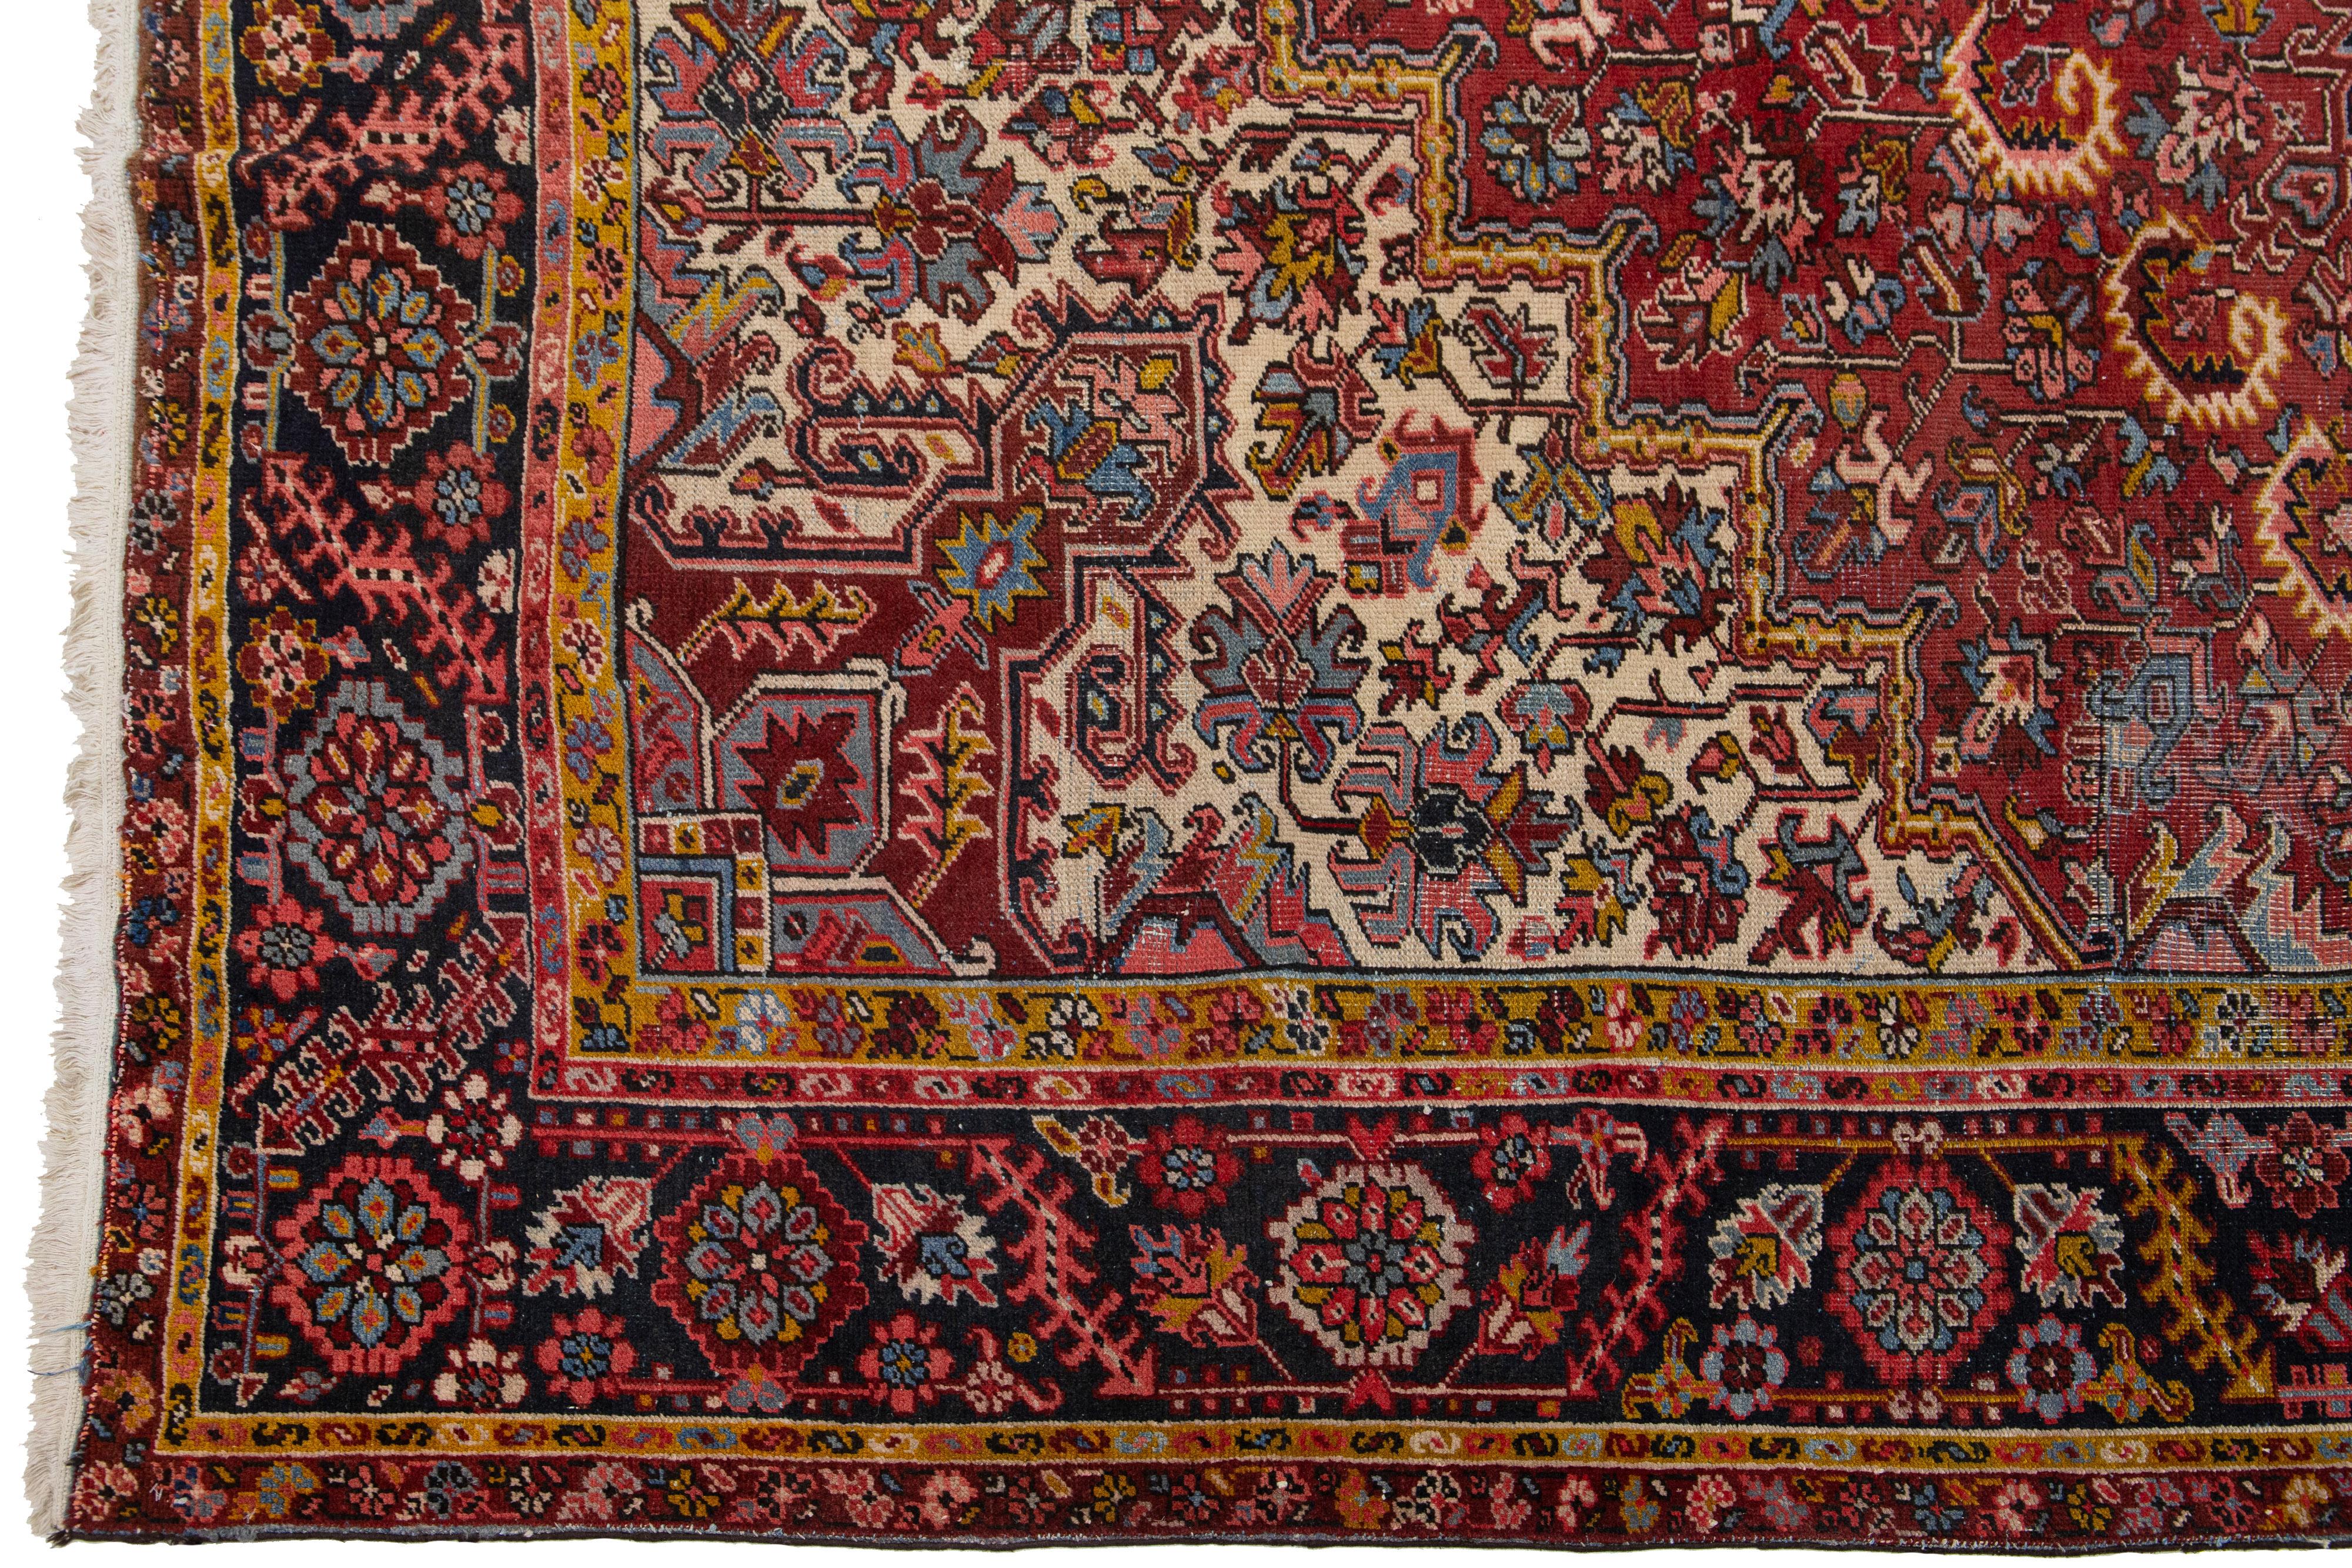 Antique Persian Heriz Wool Rug Featuring an Allover Motif In Red In Good Condition For Sale In Norwalk, CT